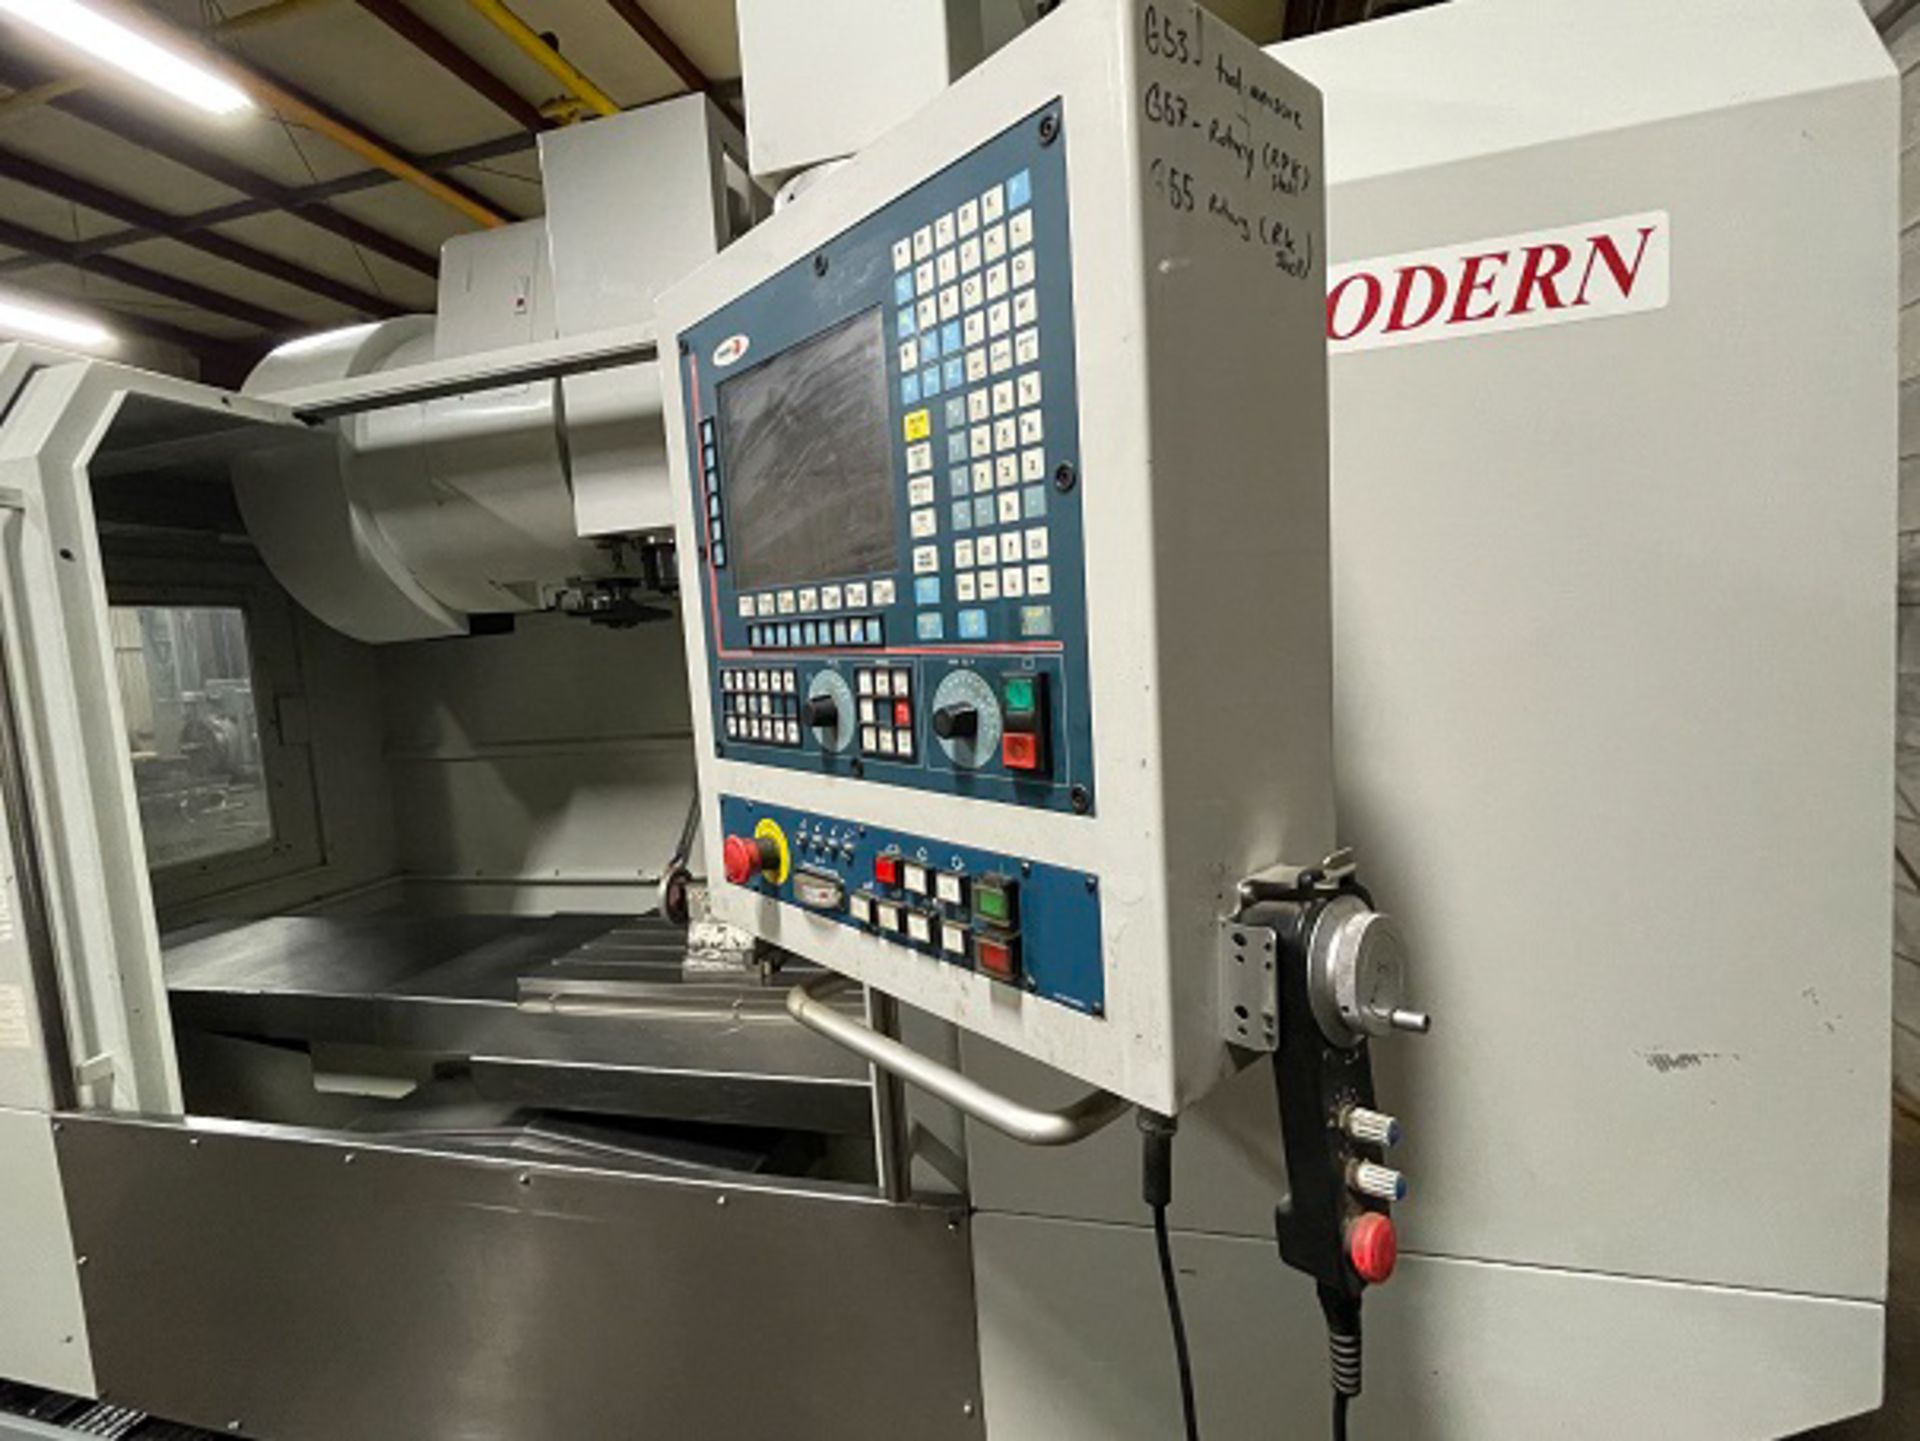 MODERN (2004) VM-1000 HIGH SPEED CNC VERTICAL MACHINING CENTER WITH FAGOR 8055M CNC CONTROL, 19" X - Image 14 of 23